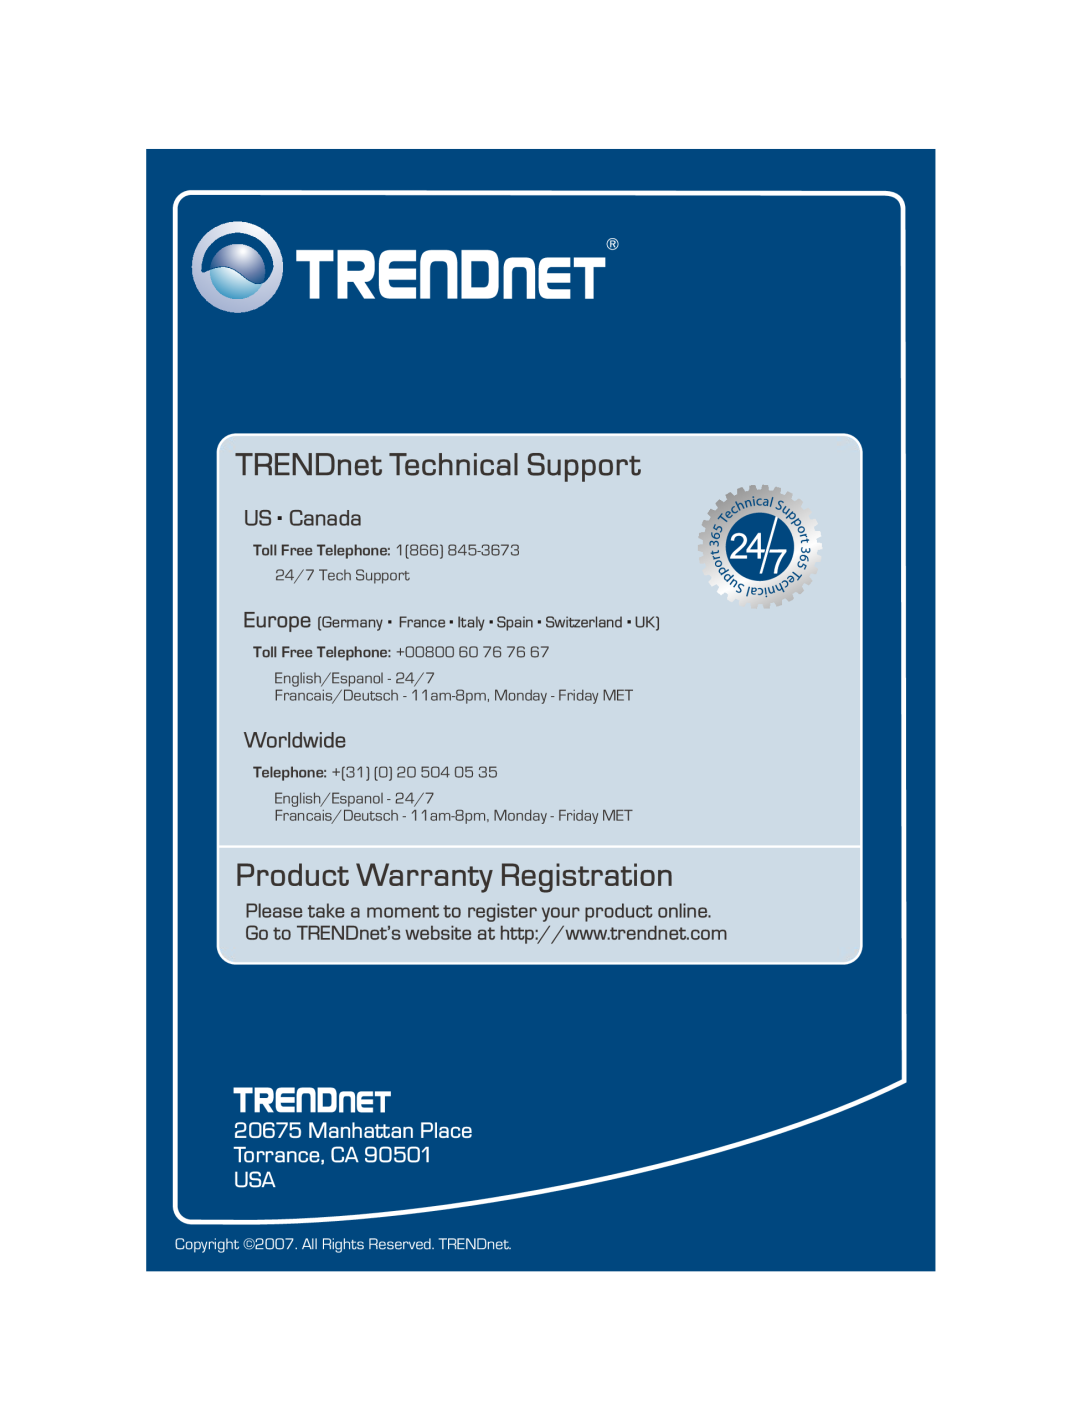 TRENDnet TEG-448WS TRENDnet Technical Support, Product Warranty Registration, US . Canada, Worldwide, Toll Free Telephone 